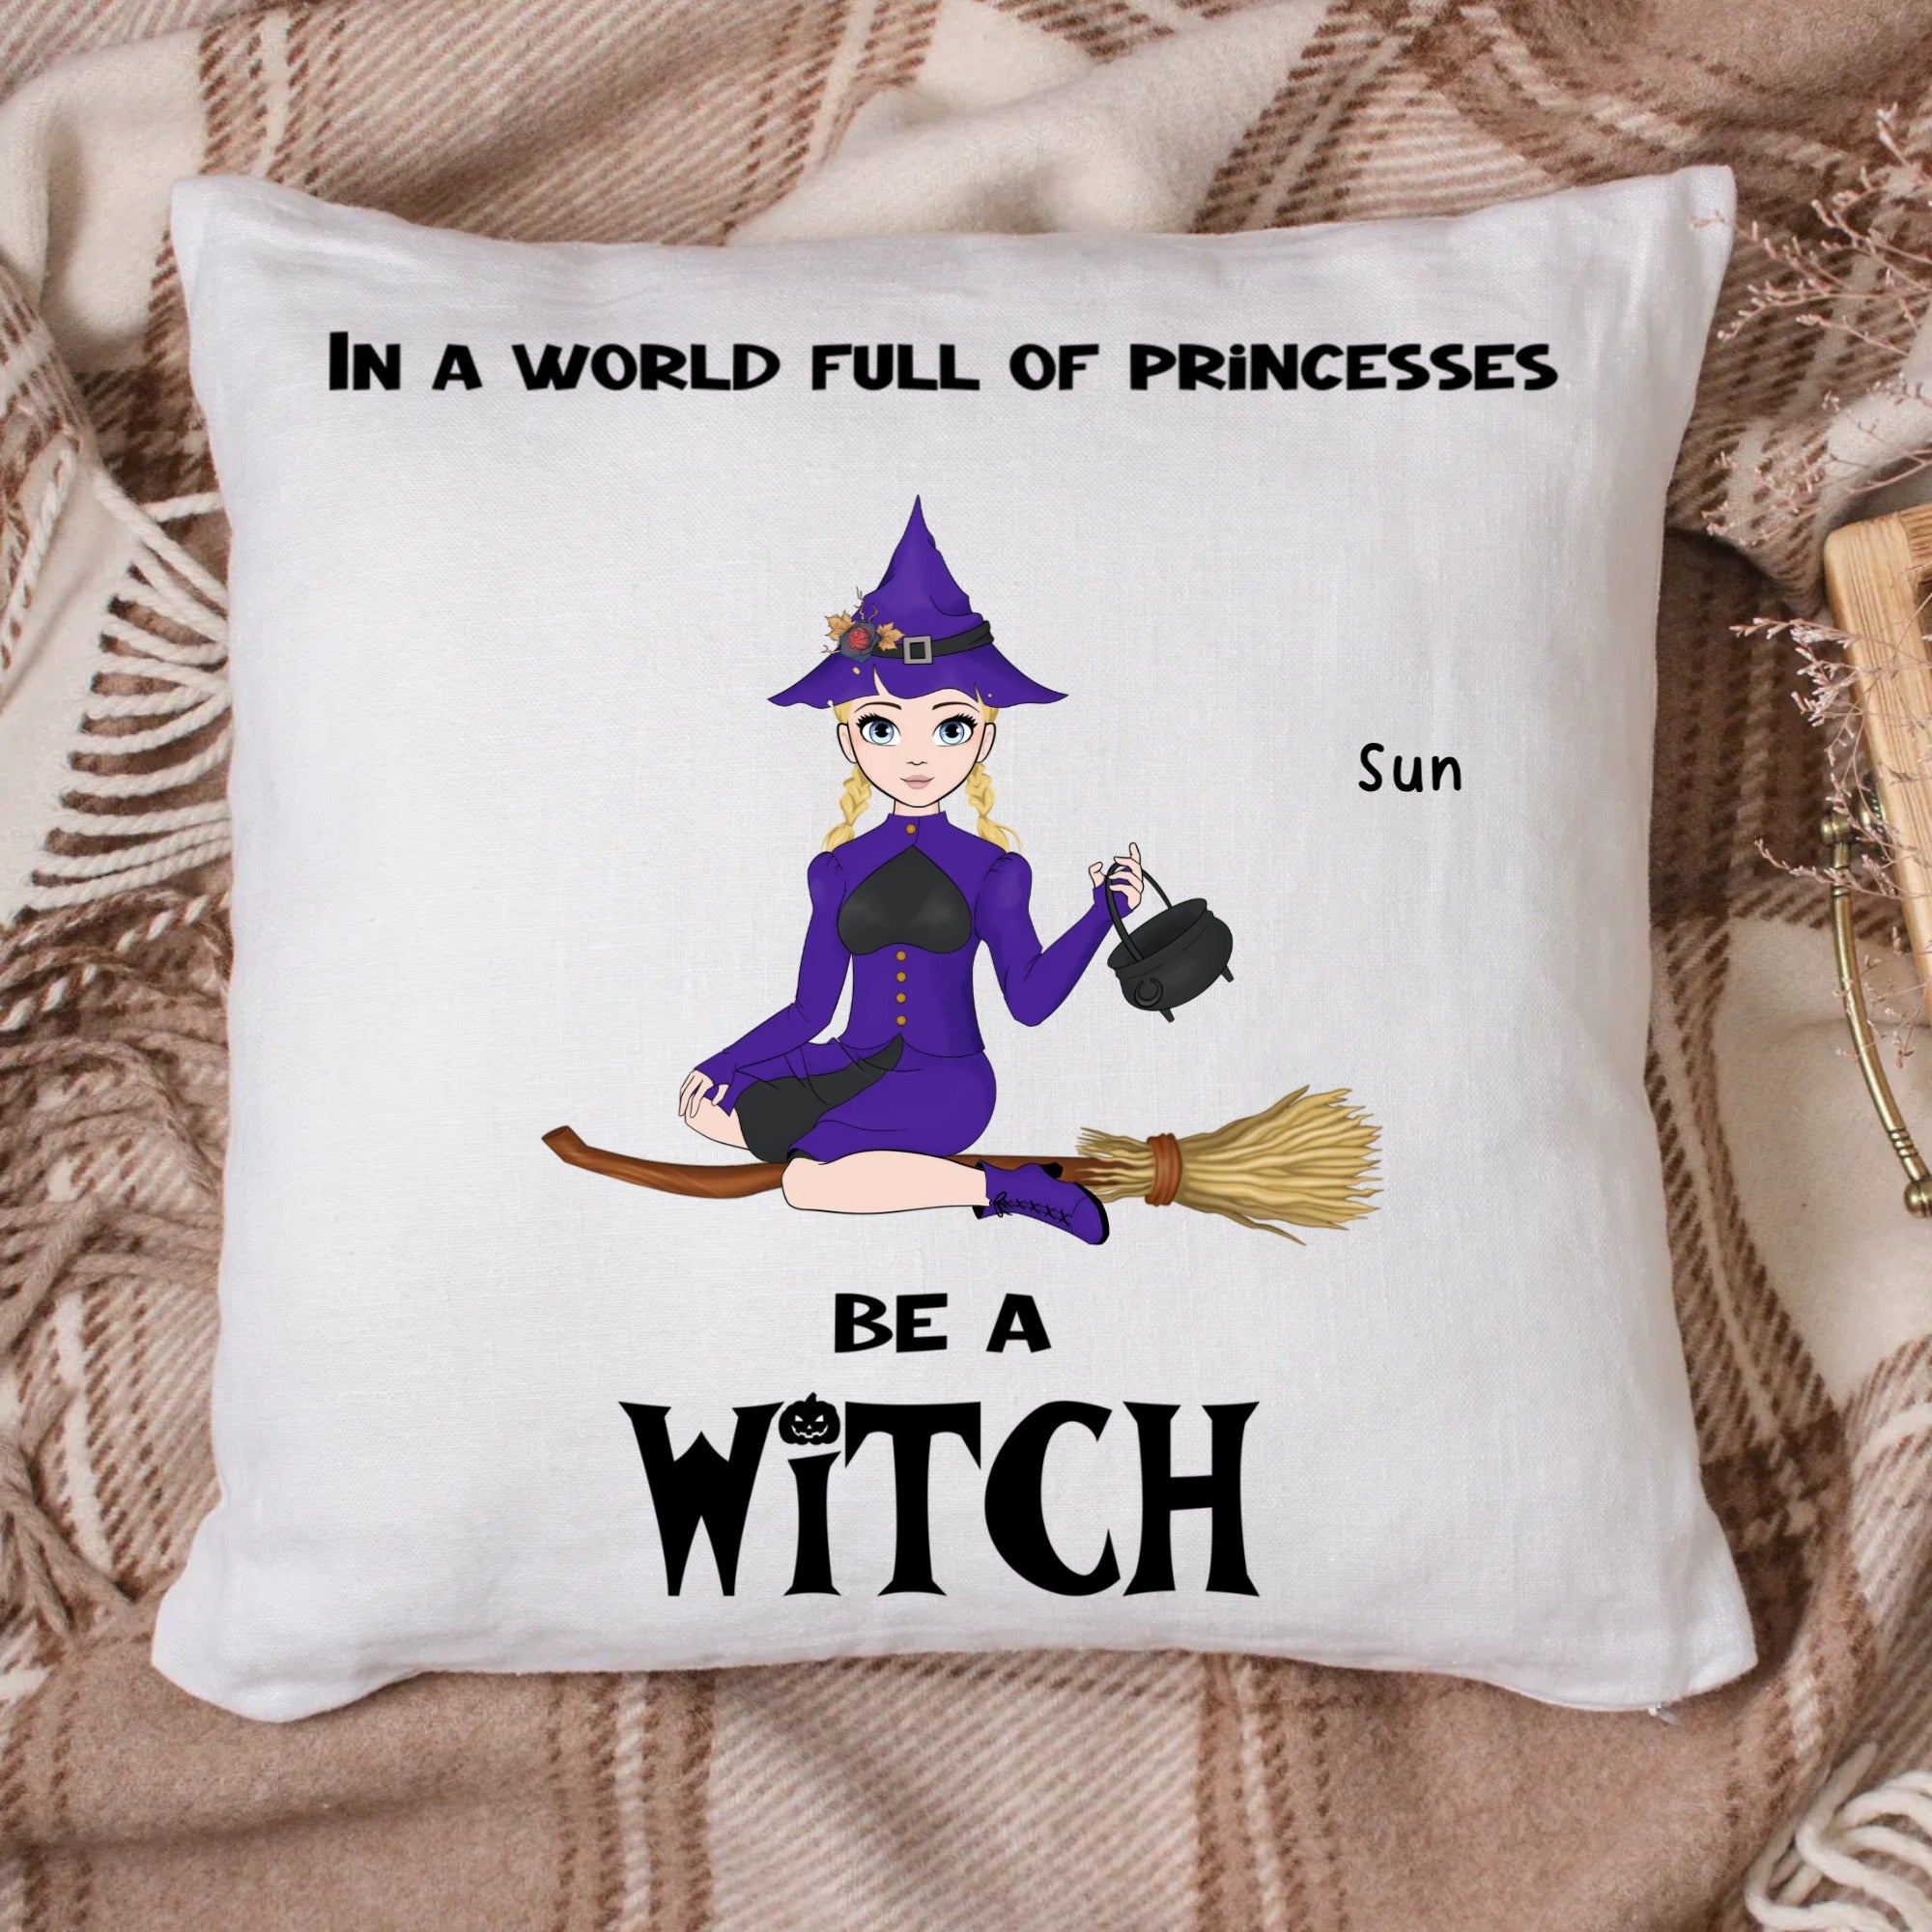 Eco Pillow Artwork Halloween - In a world full of princesses be a witch